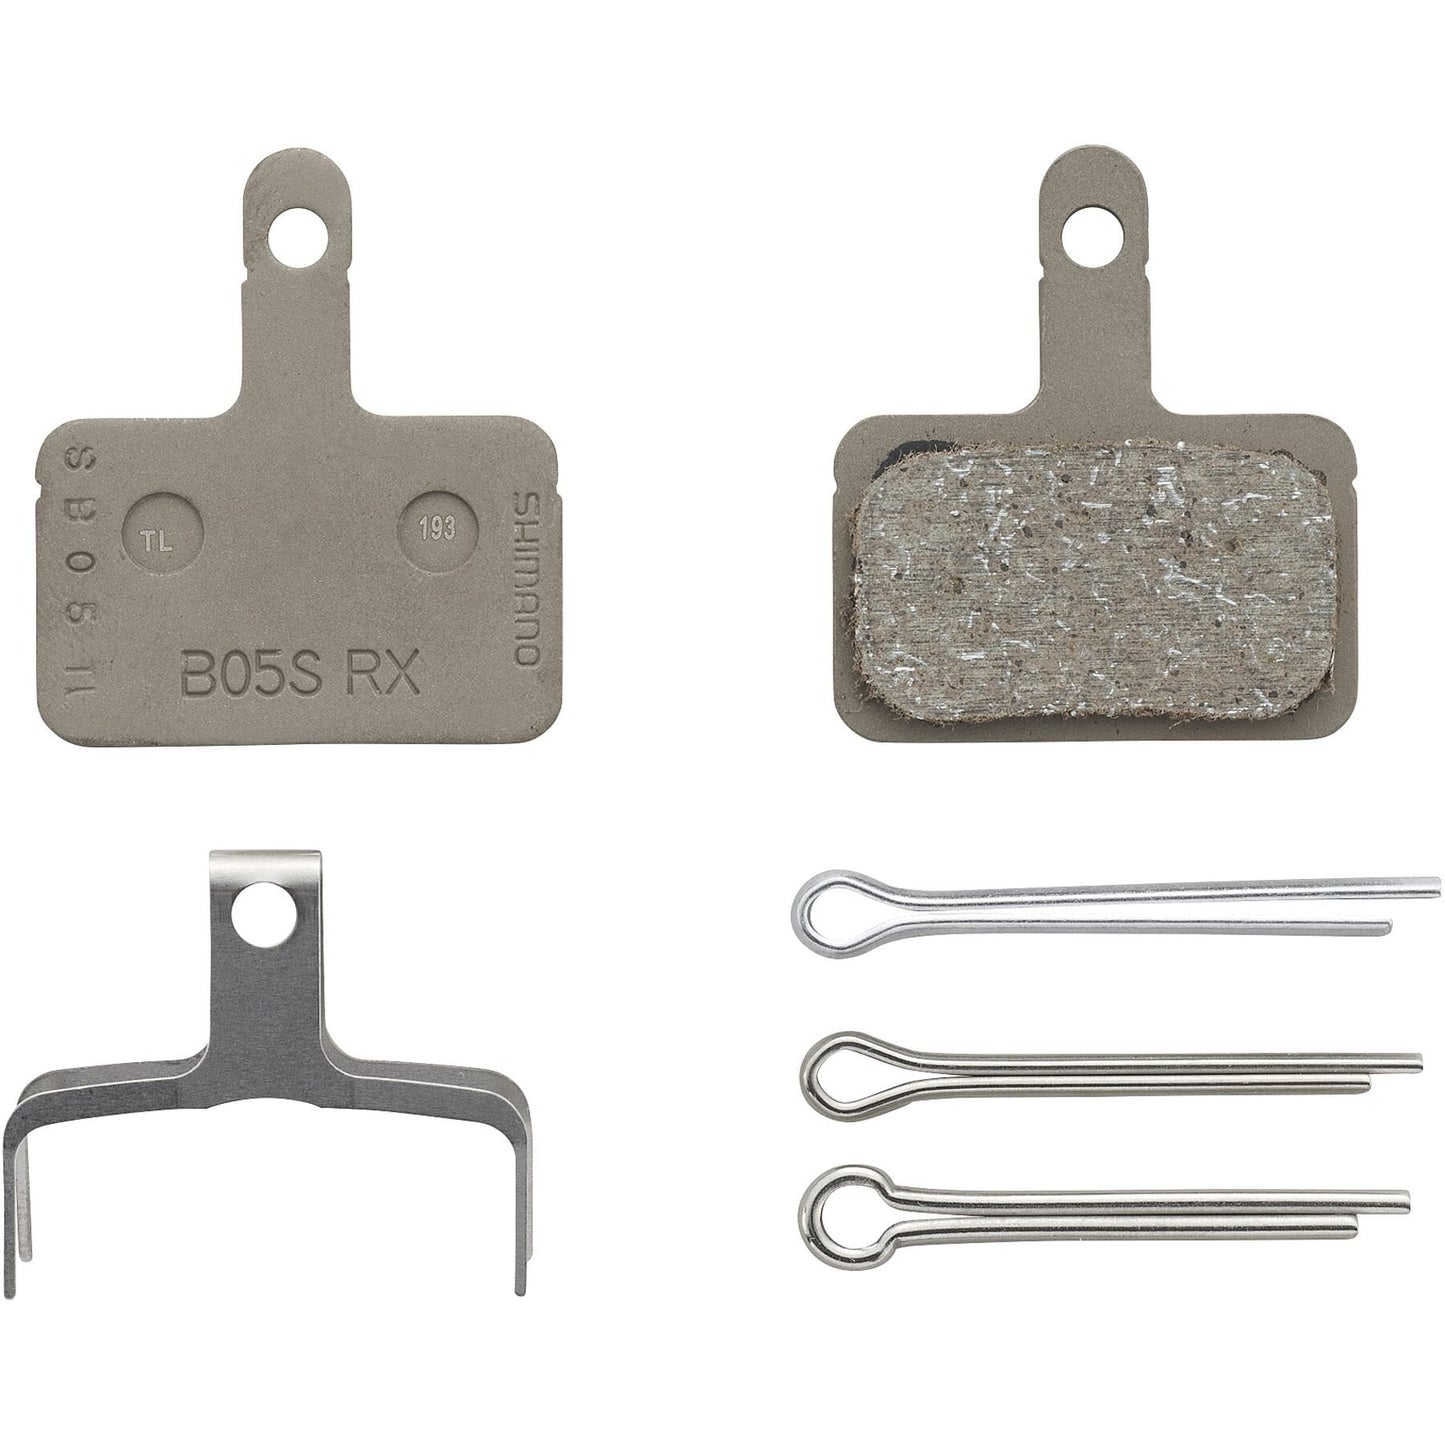 Shimano B05S Disc Brake Pads and Spring, (steel backed, resin)